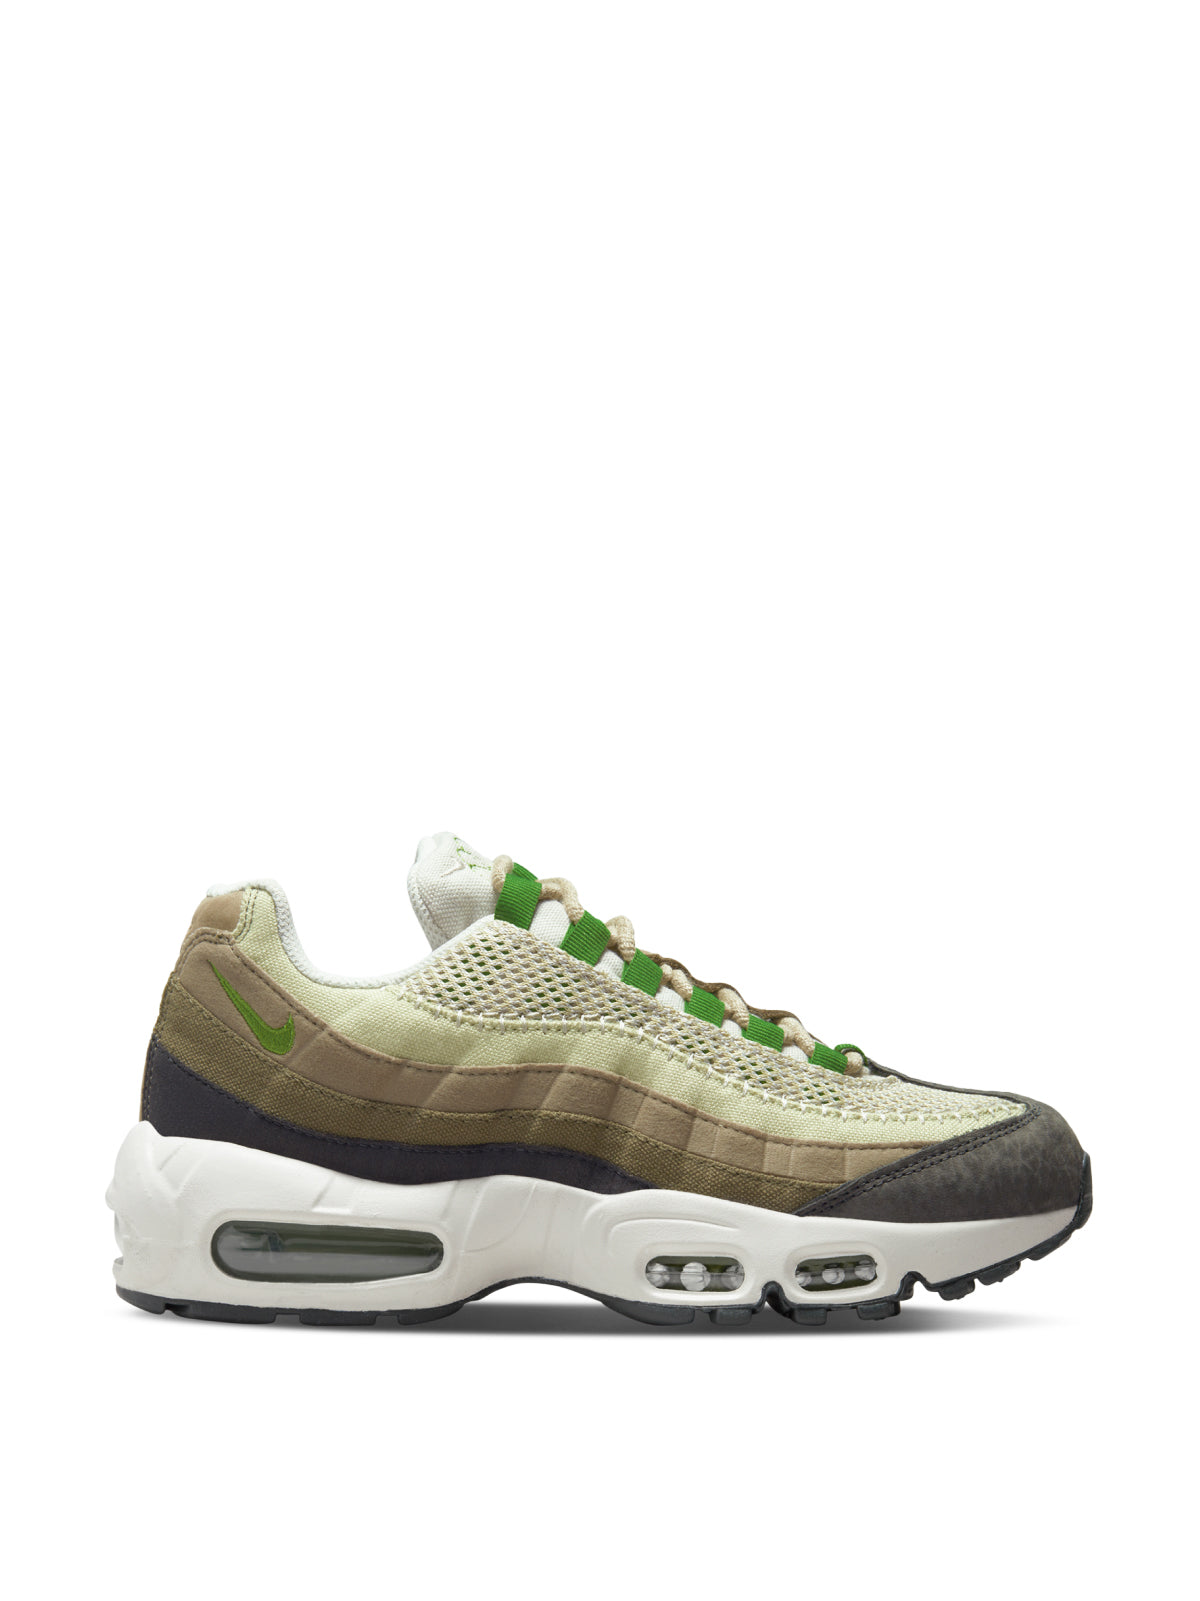 Nike-OUTLET-SALE-Air Max 95 Chlorophyll Sneakers-ARCHIVIST